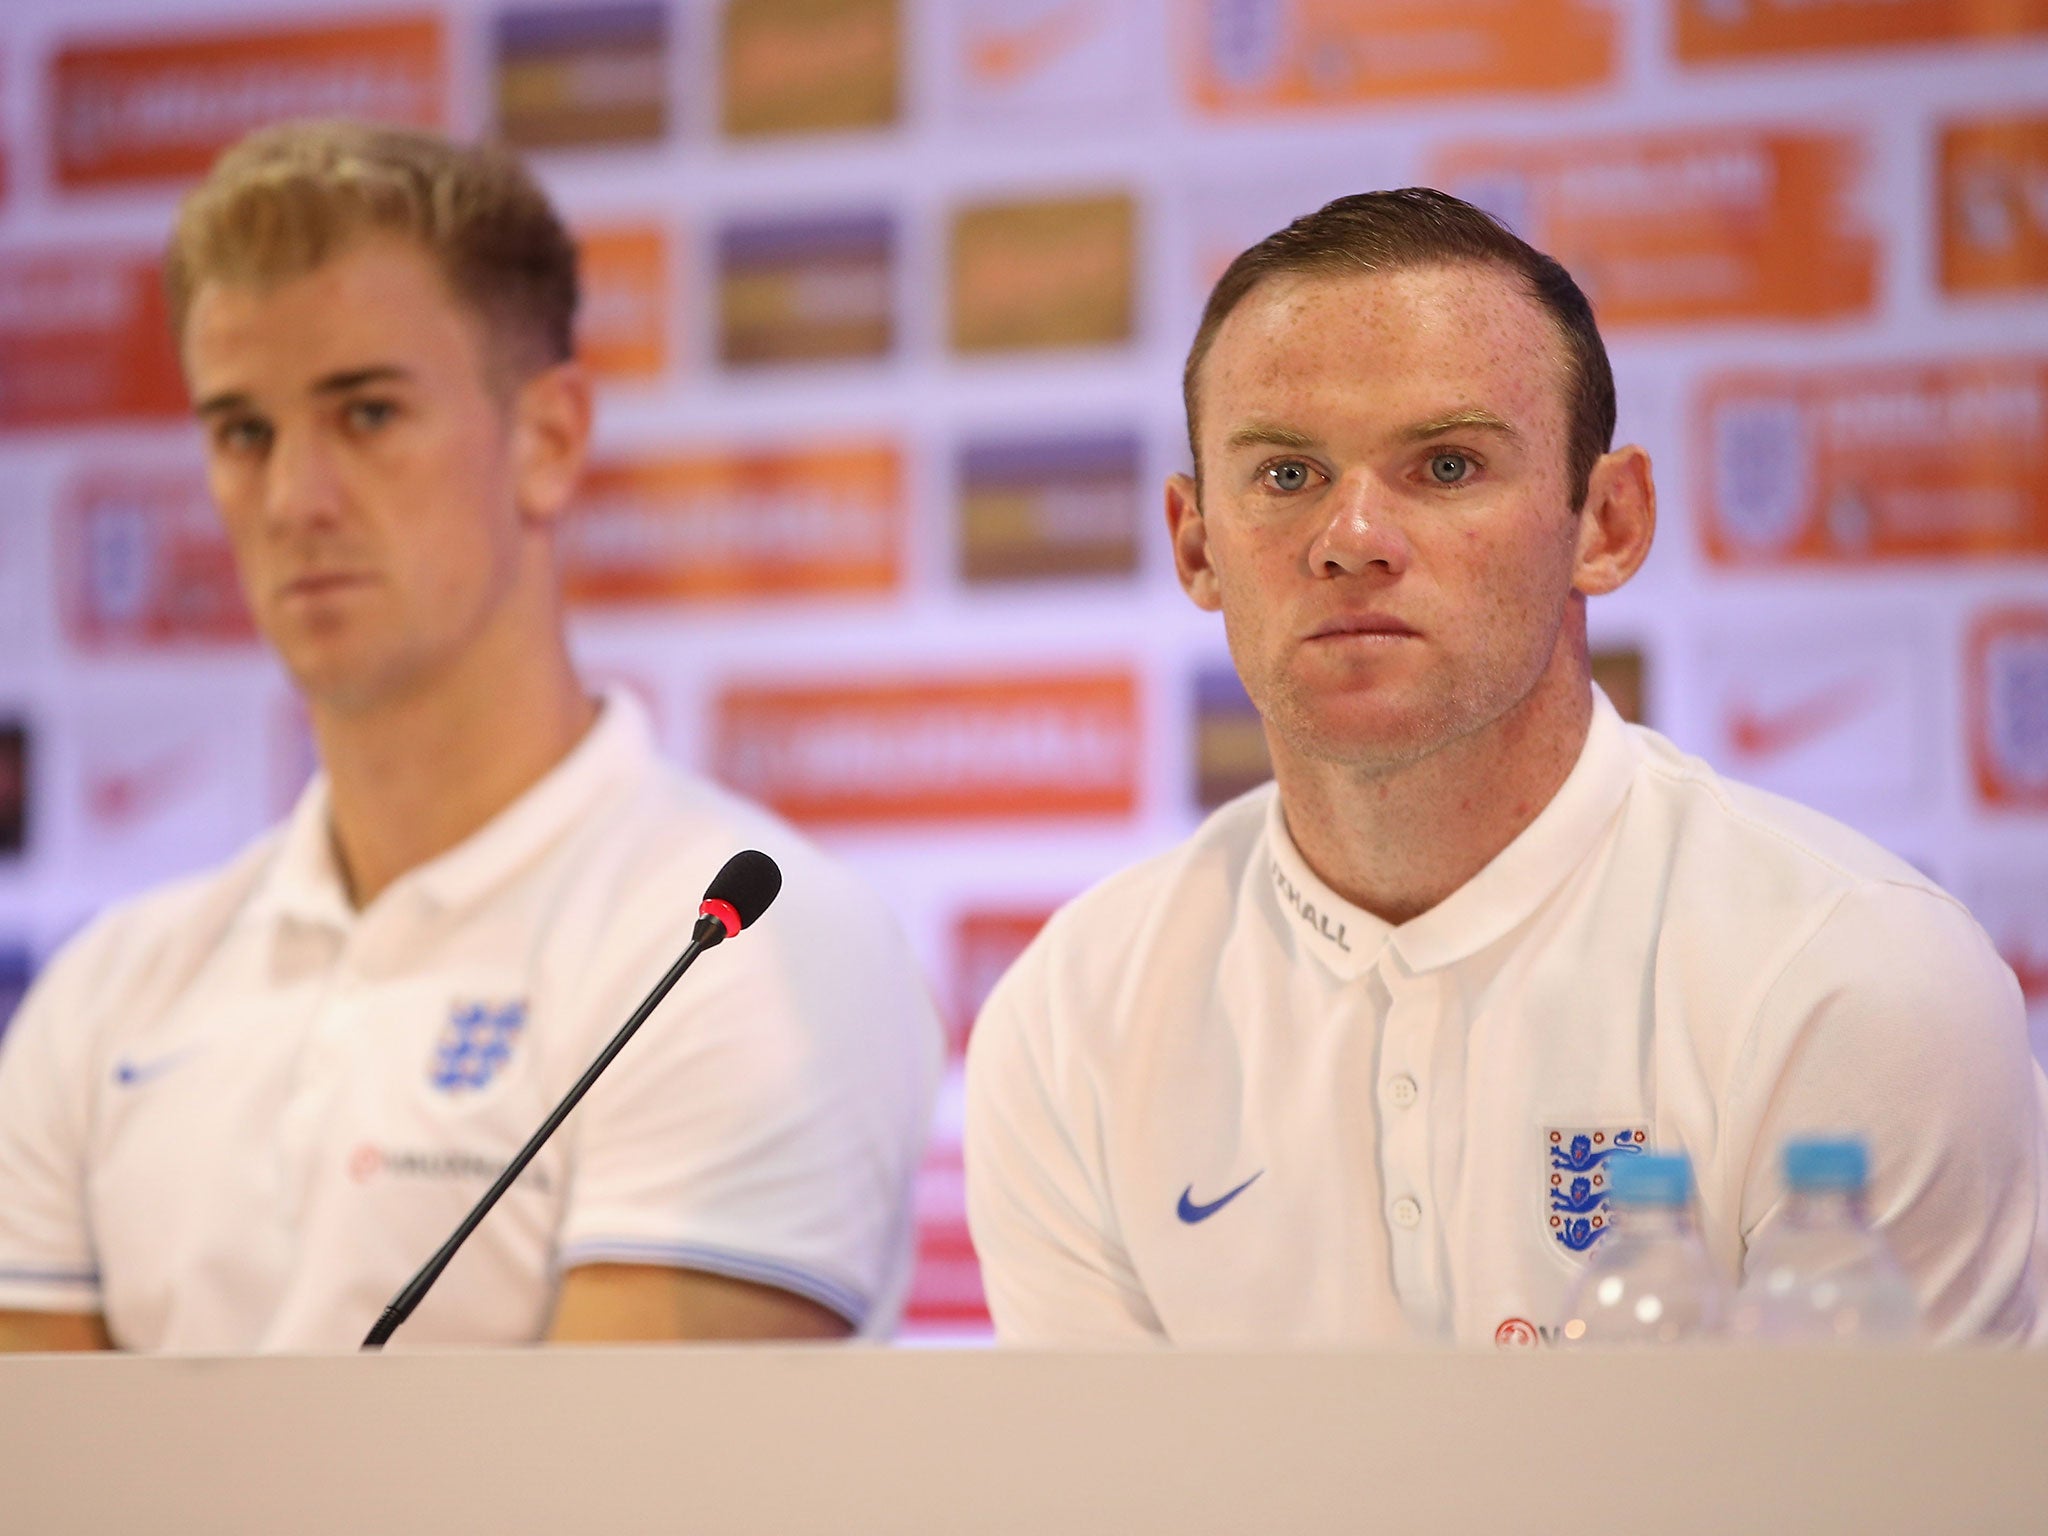 Joe Hart and Wayne Rooney face the media in a press conference after an England training session at the Urca Military Base on June 21, 2014 in Rio de Janeiro, Brazil